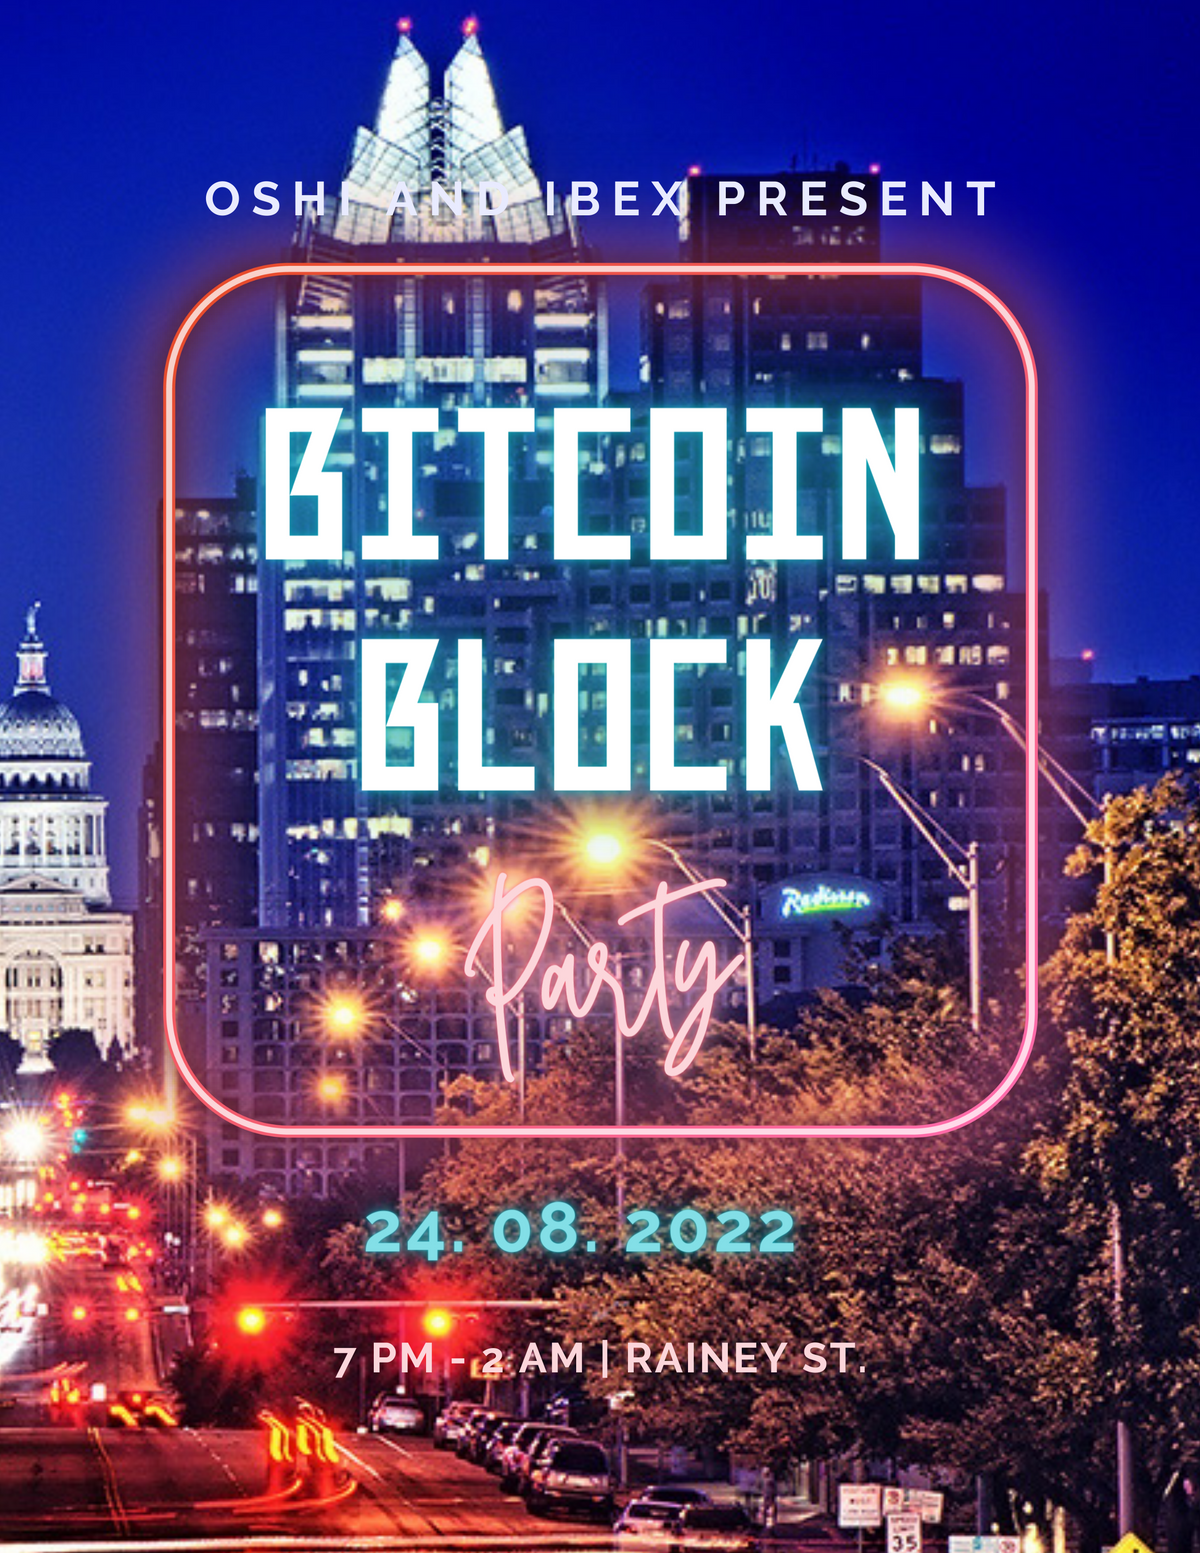 ⚡BITCOIN BLOCK PARTY IS BACK⚡